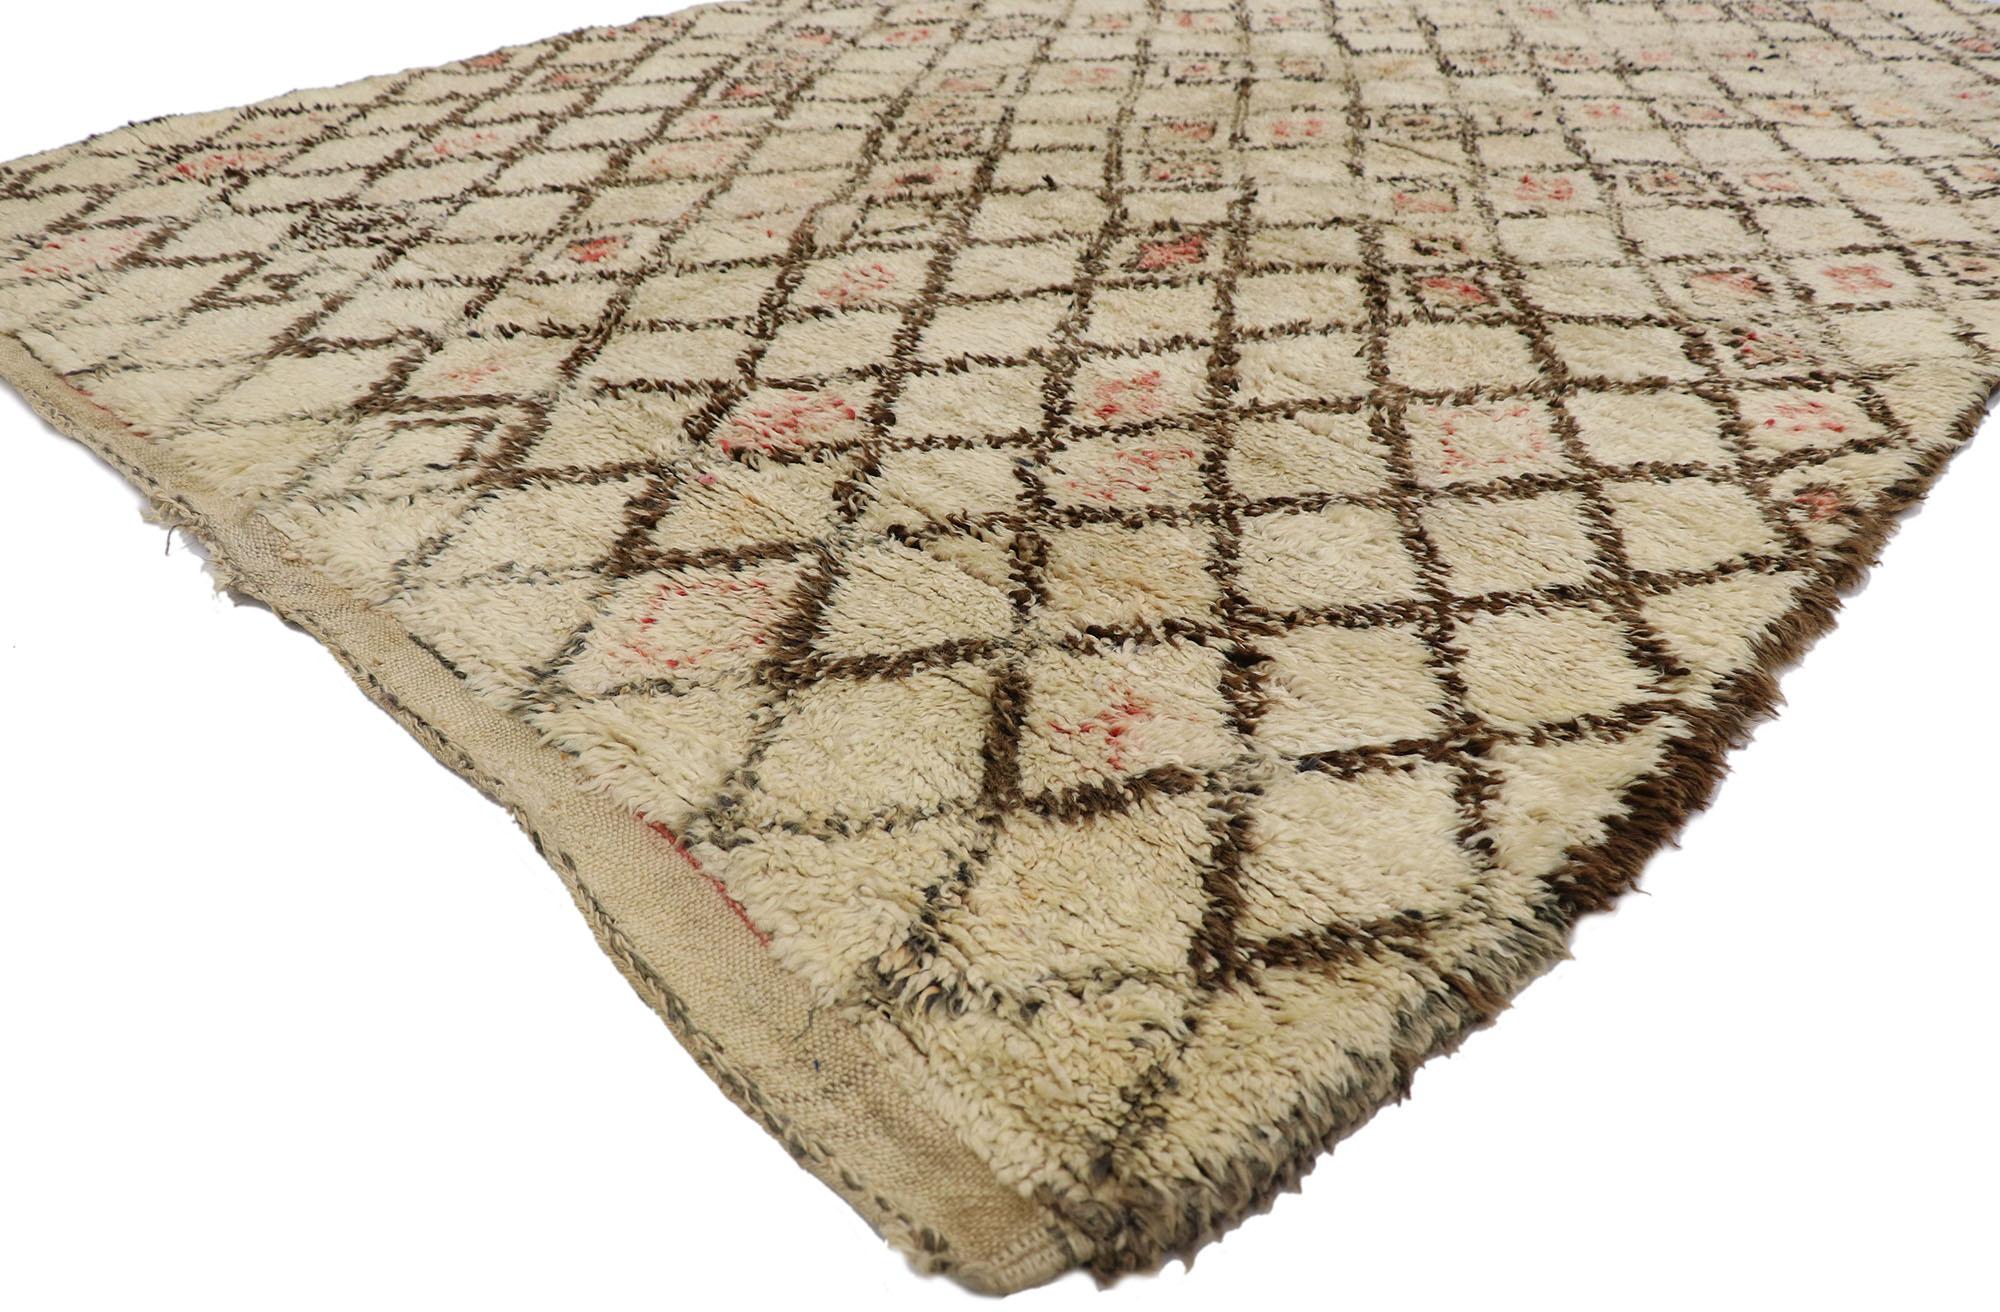 21359 Vintage Moroccan Beni Ourain Rug, 06'01 x 09'03.
Emulating nomadic charm with incredible detail and texture, this hand knotted wool vintage Beni Ourain Moroccan rug is a captivating vision of woven beauty. The detailed diamond trellis and